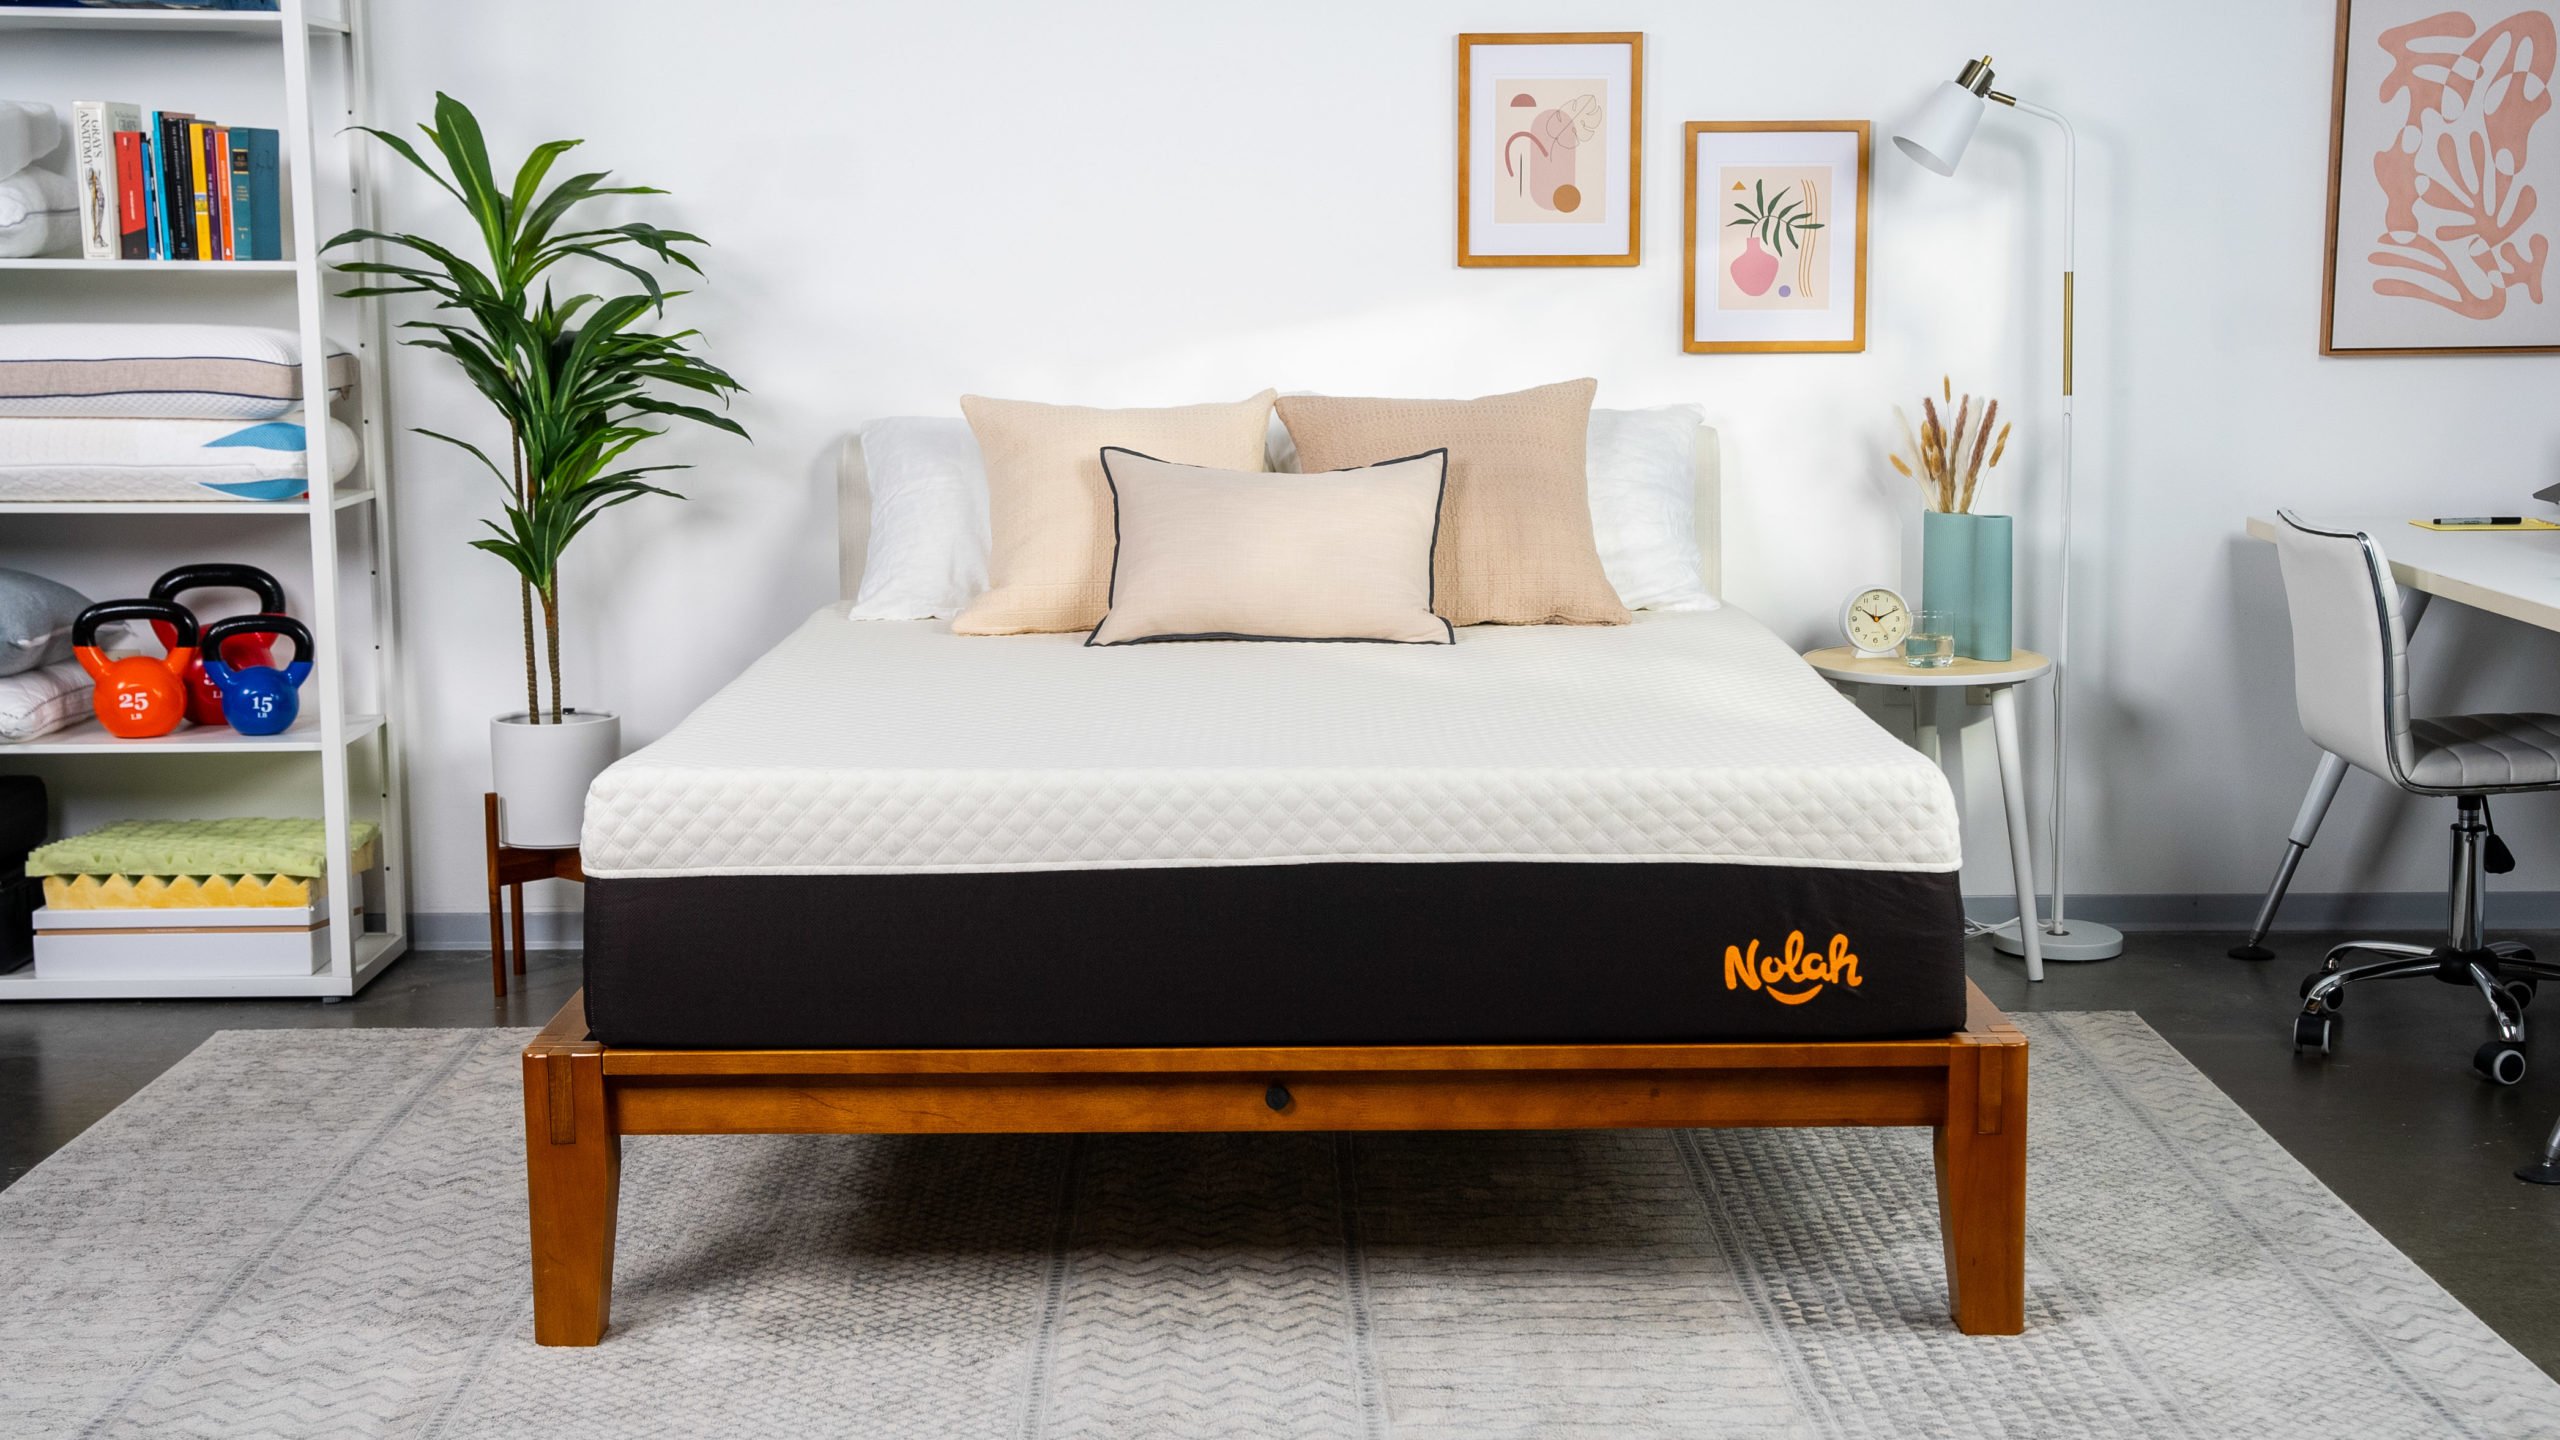 A picture of the Nolah Signature Mattress in Sleep Foundation's test lab.